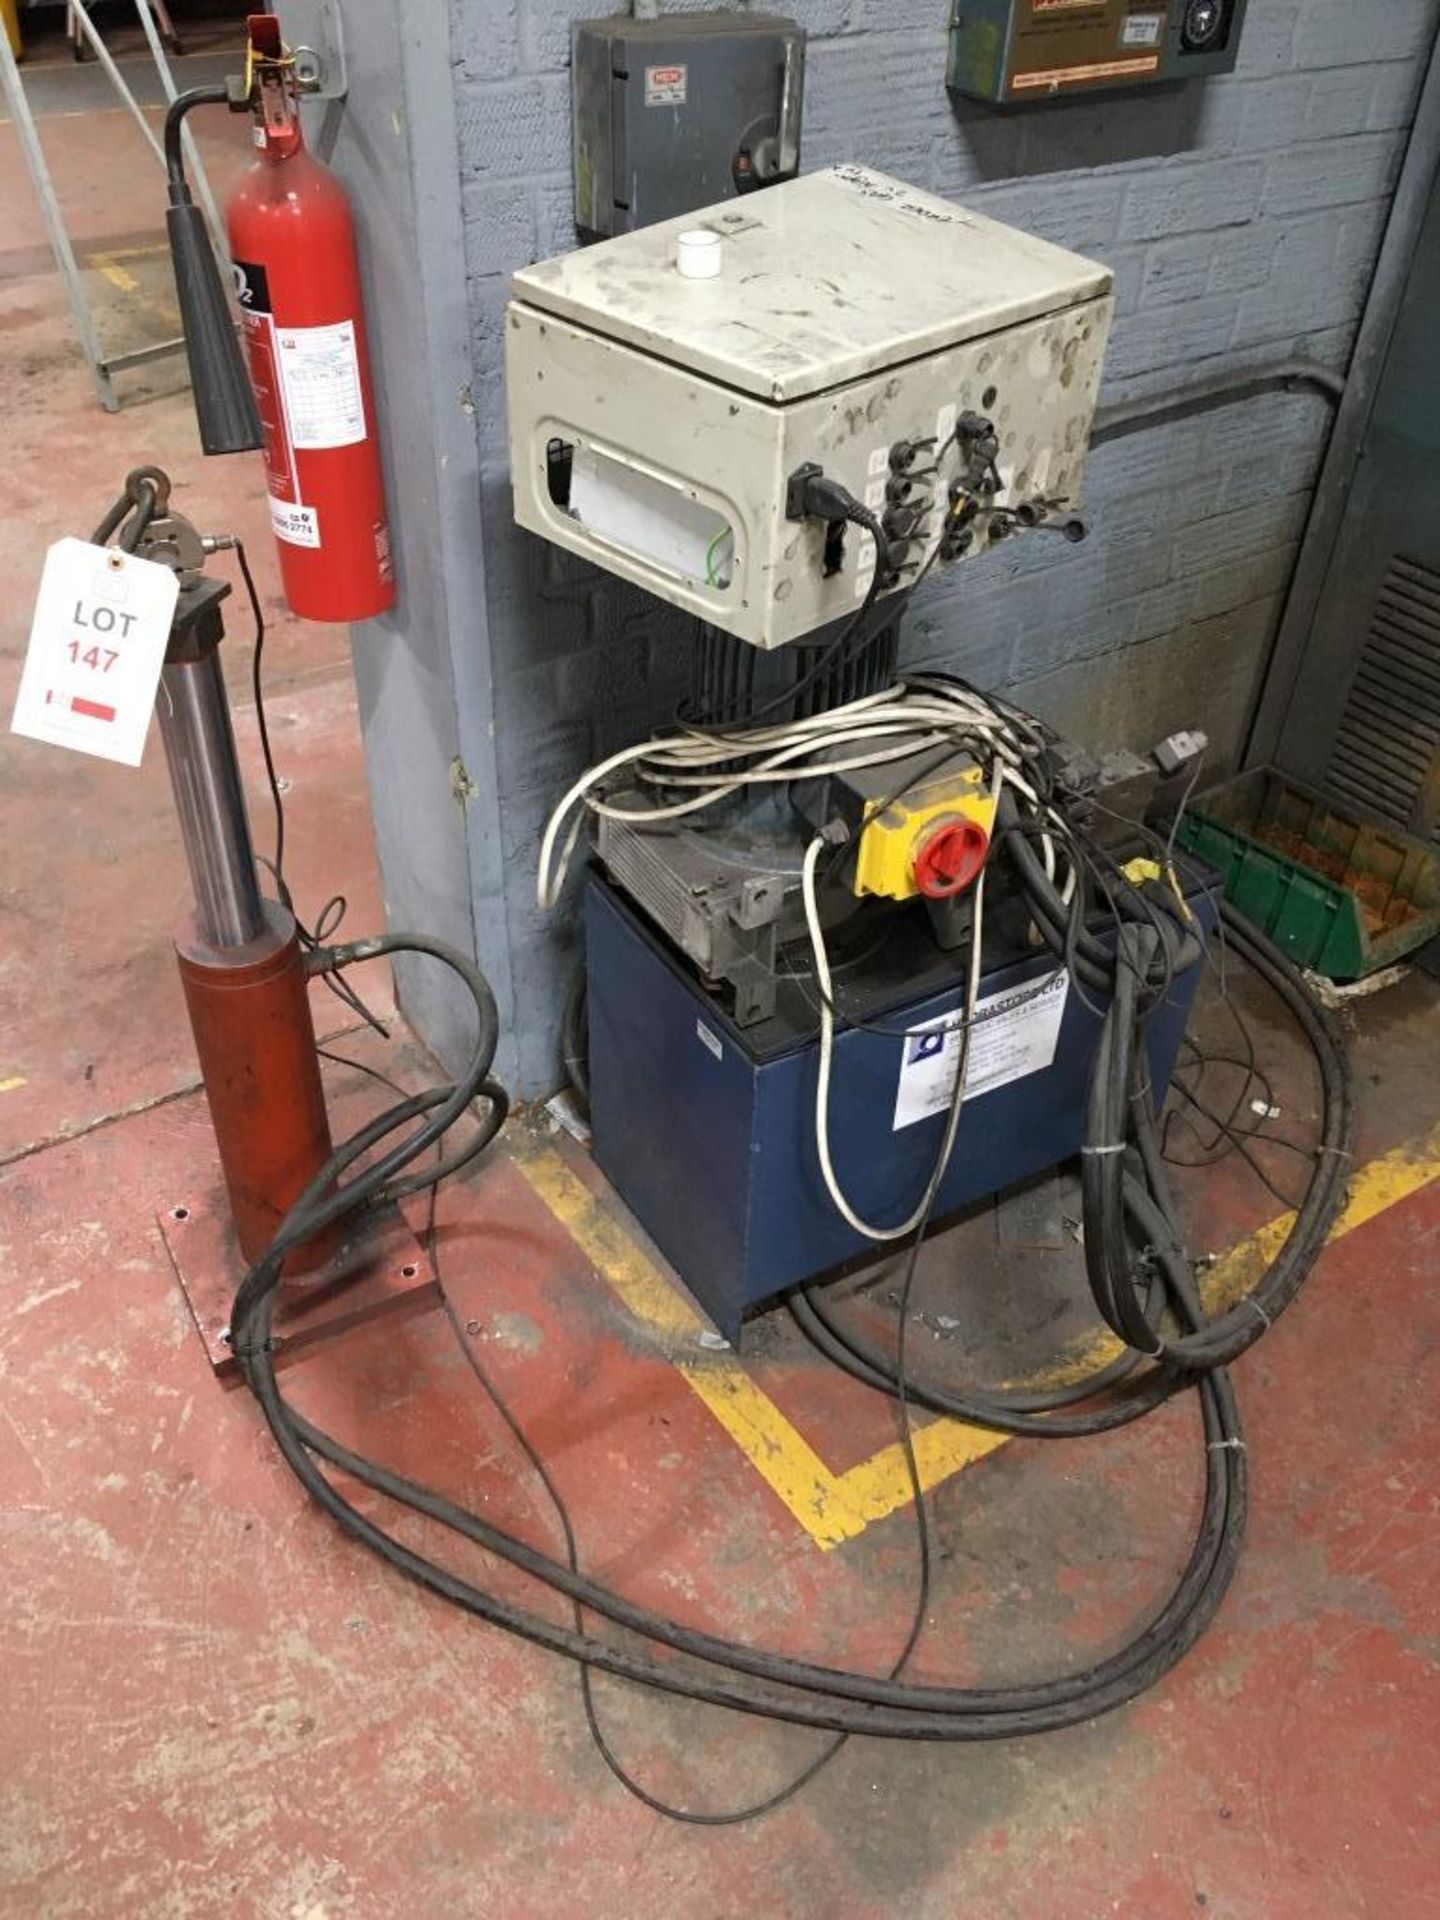 Hydrastore load tester. NB: This item has no CE marking. The purchaser is required to satisfy